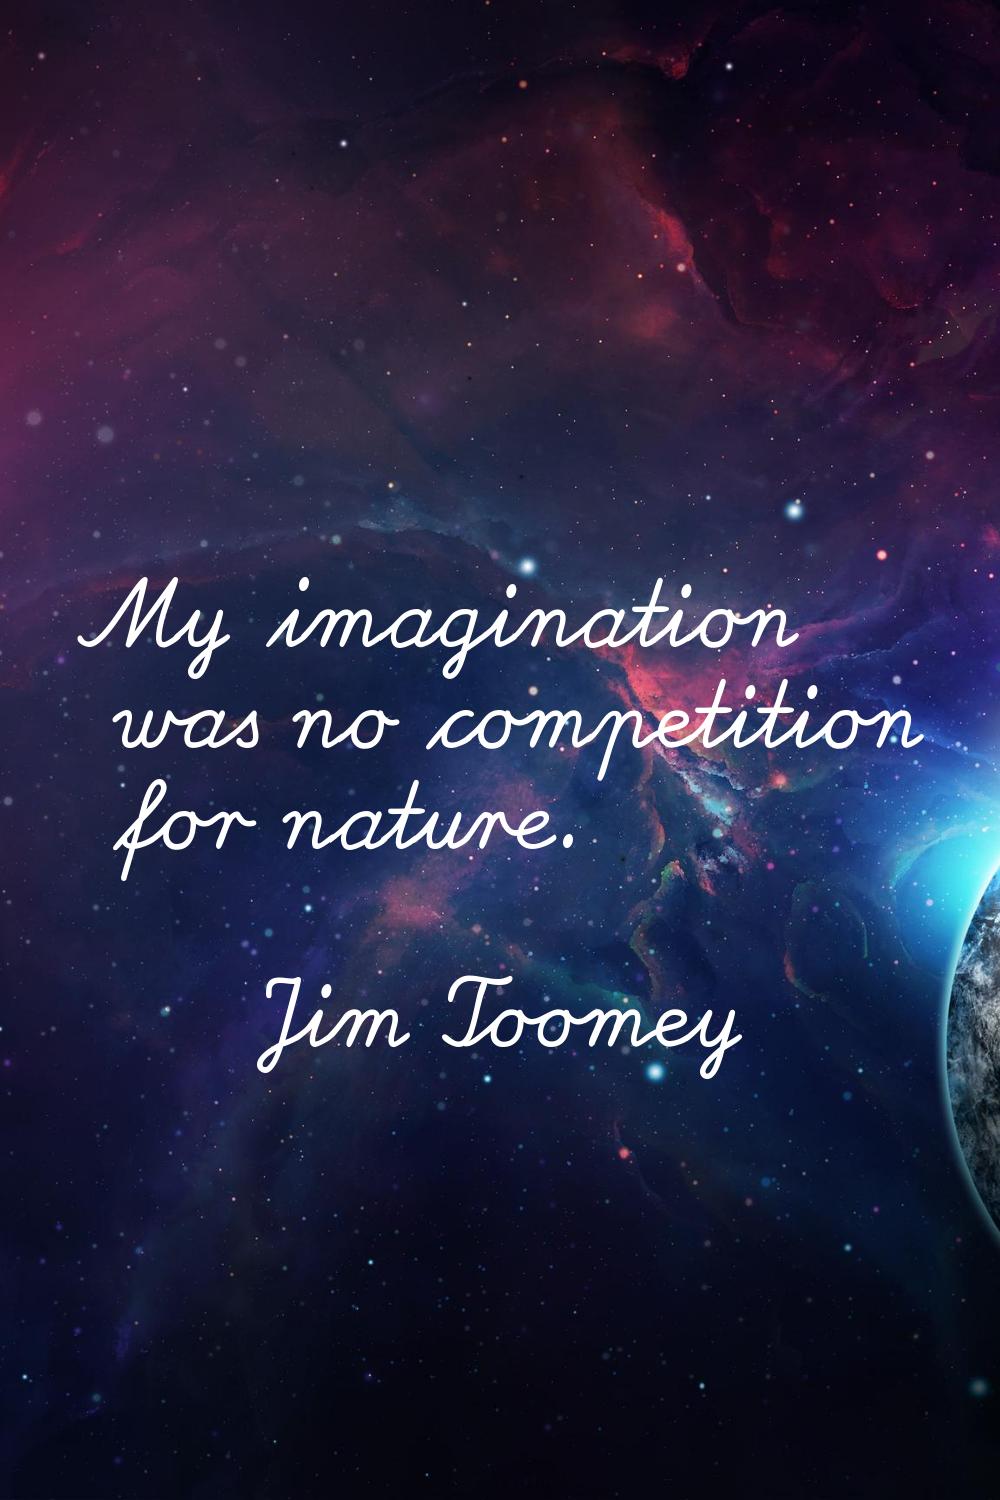 My imagination was no competition for nature.